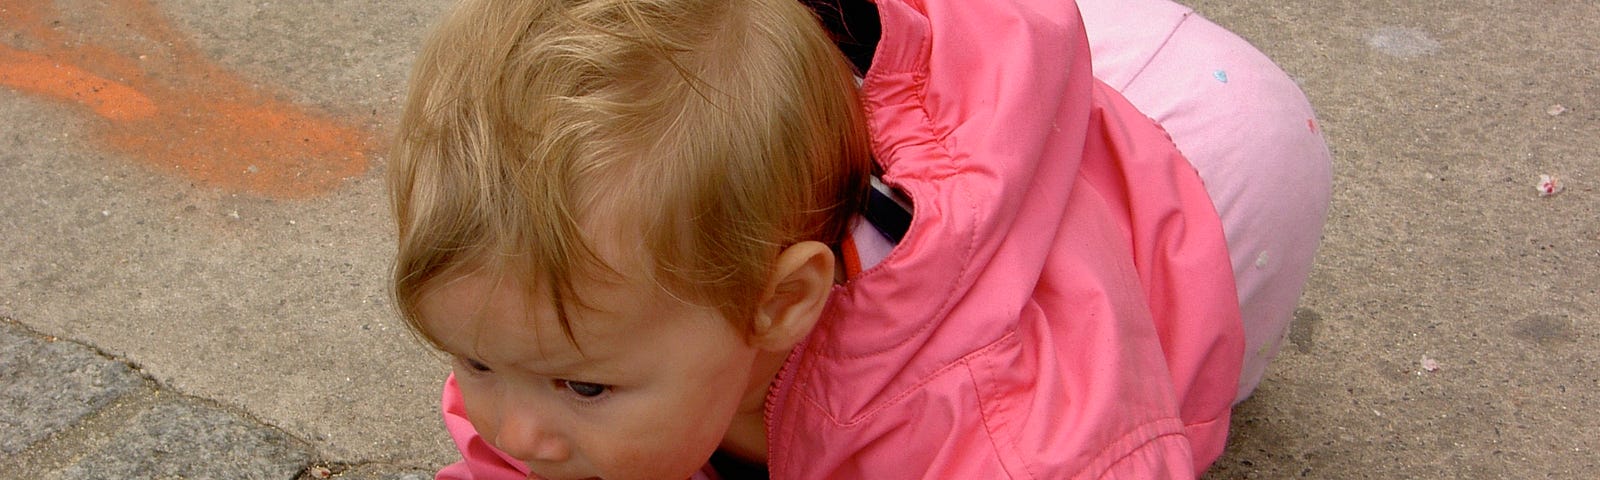 A baby clad in pink focuses on a pigeon off screen.